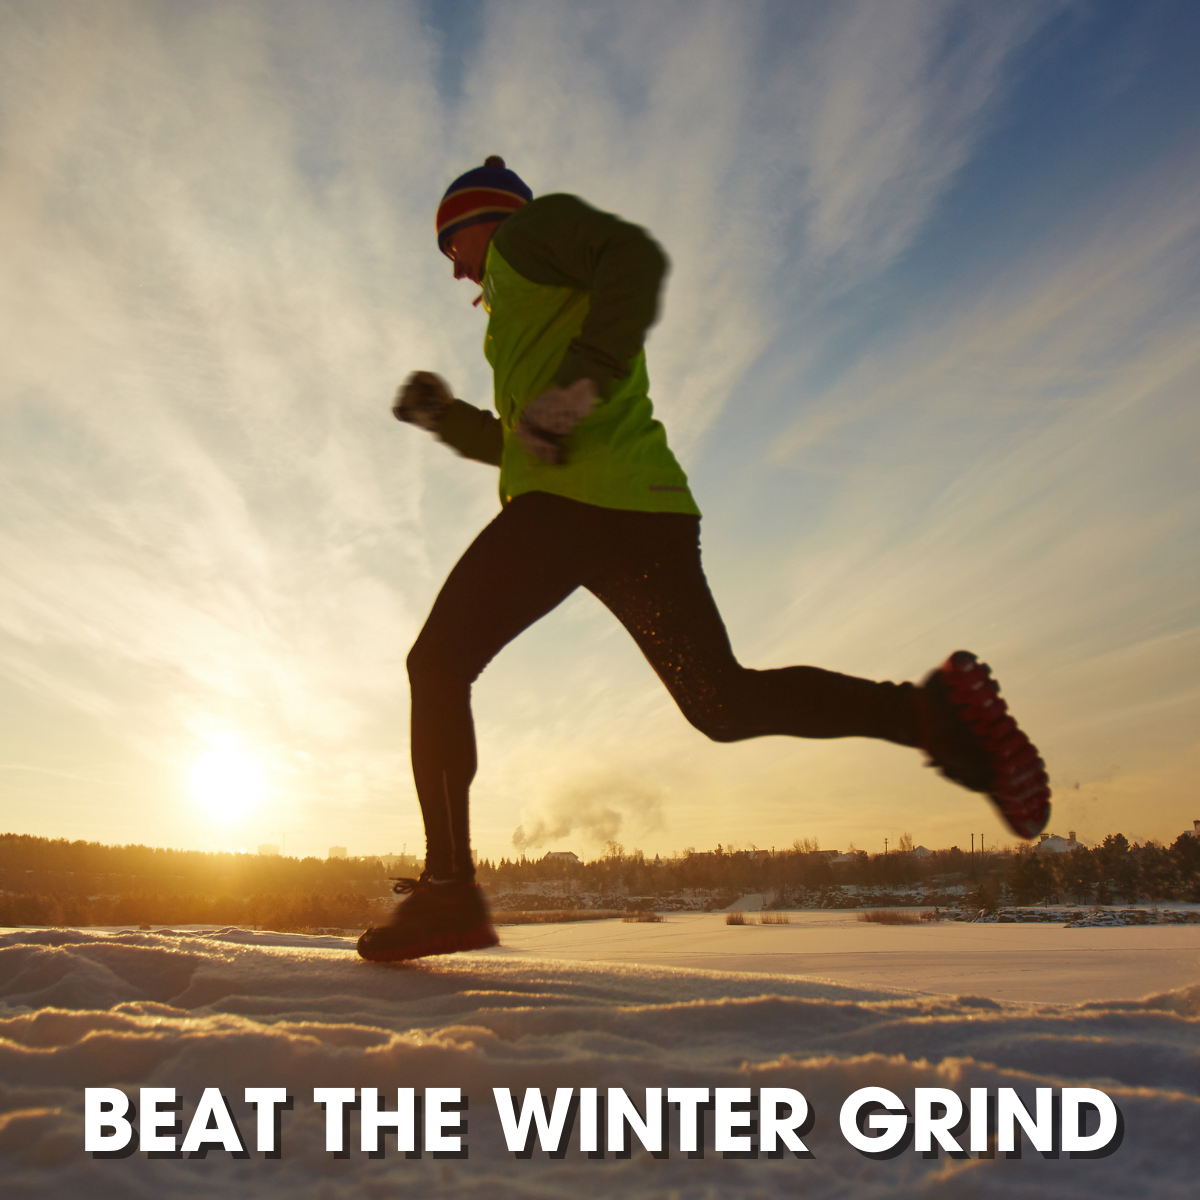 How to Beat the Winter Grind